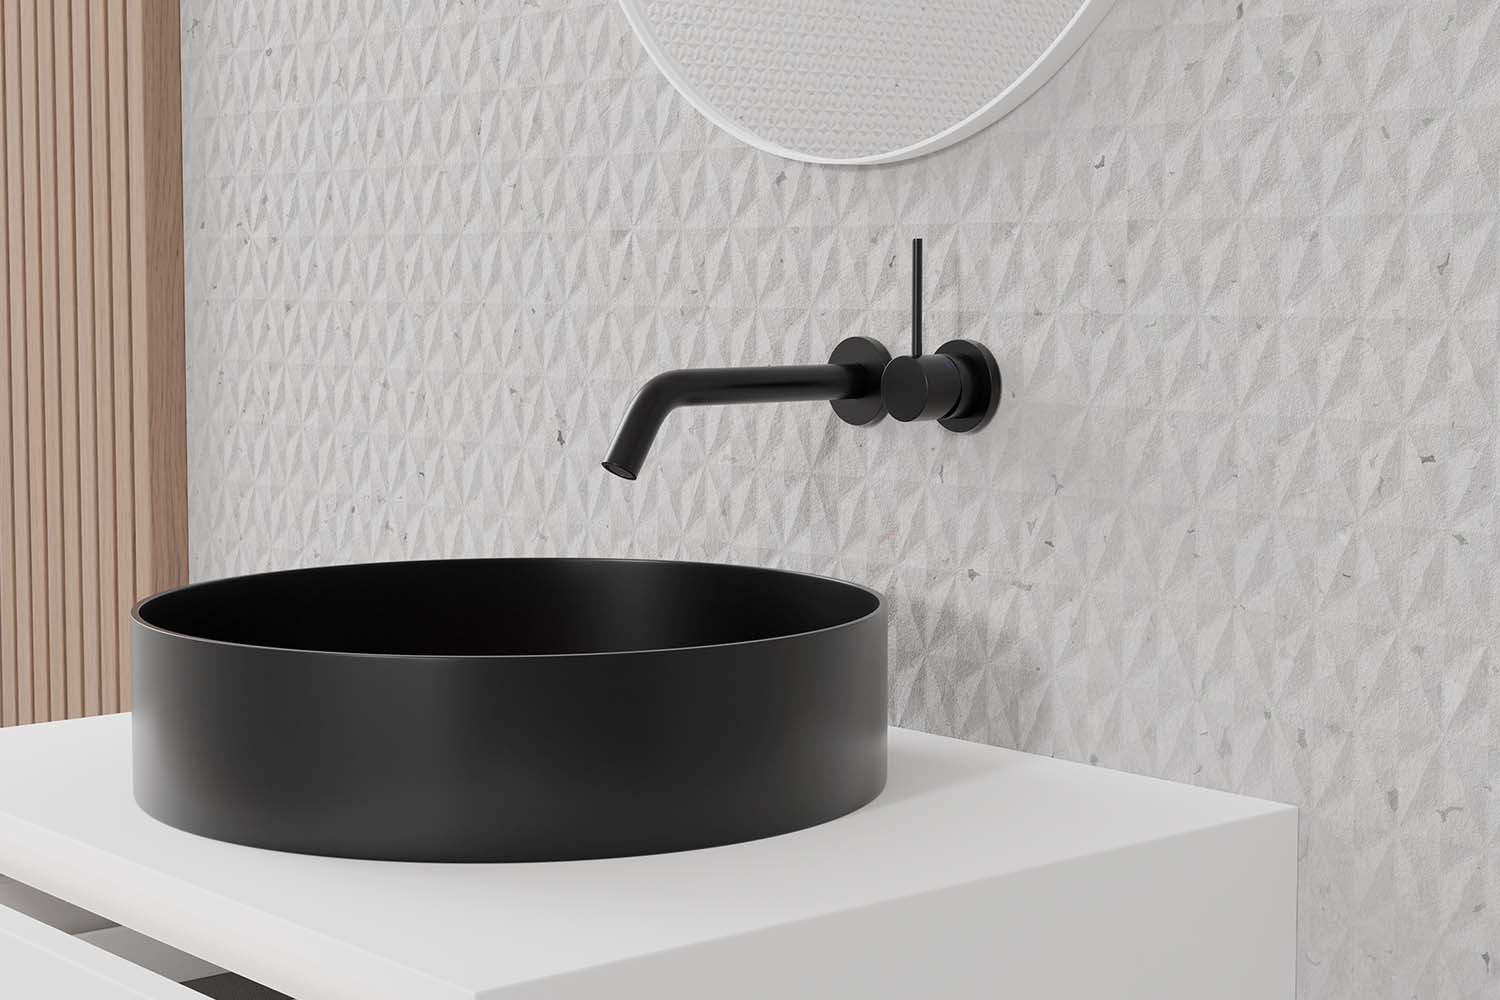 Primy built-in basin mixer for the bathroom